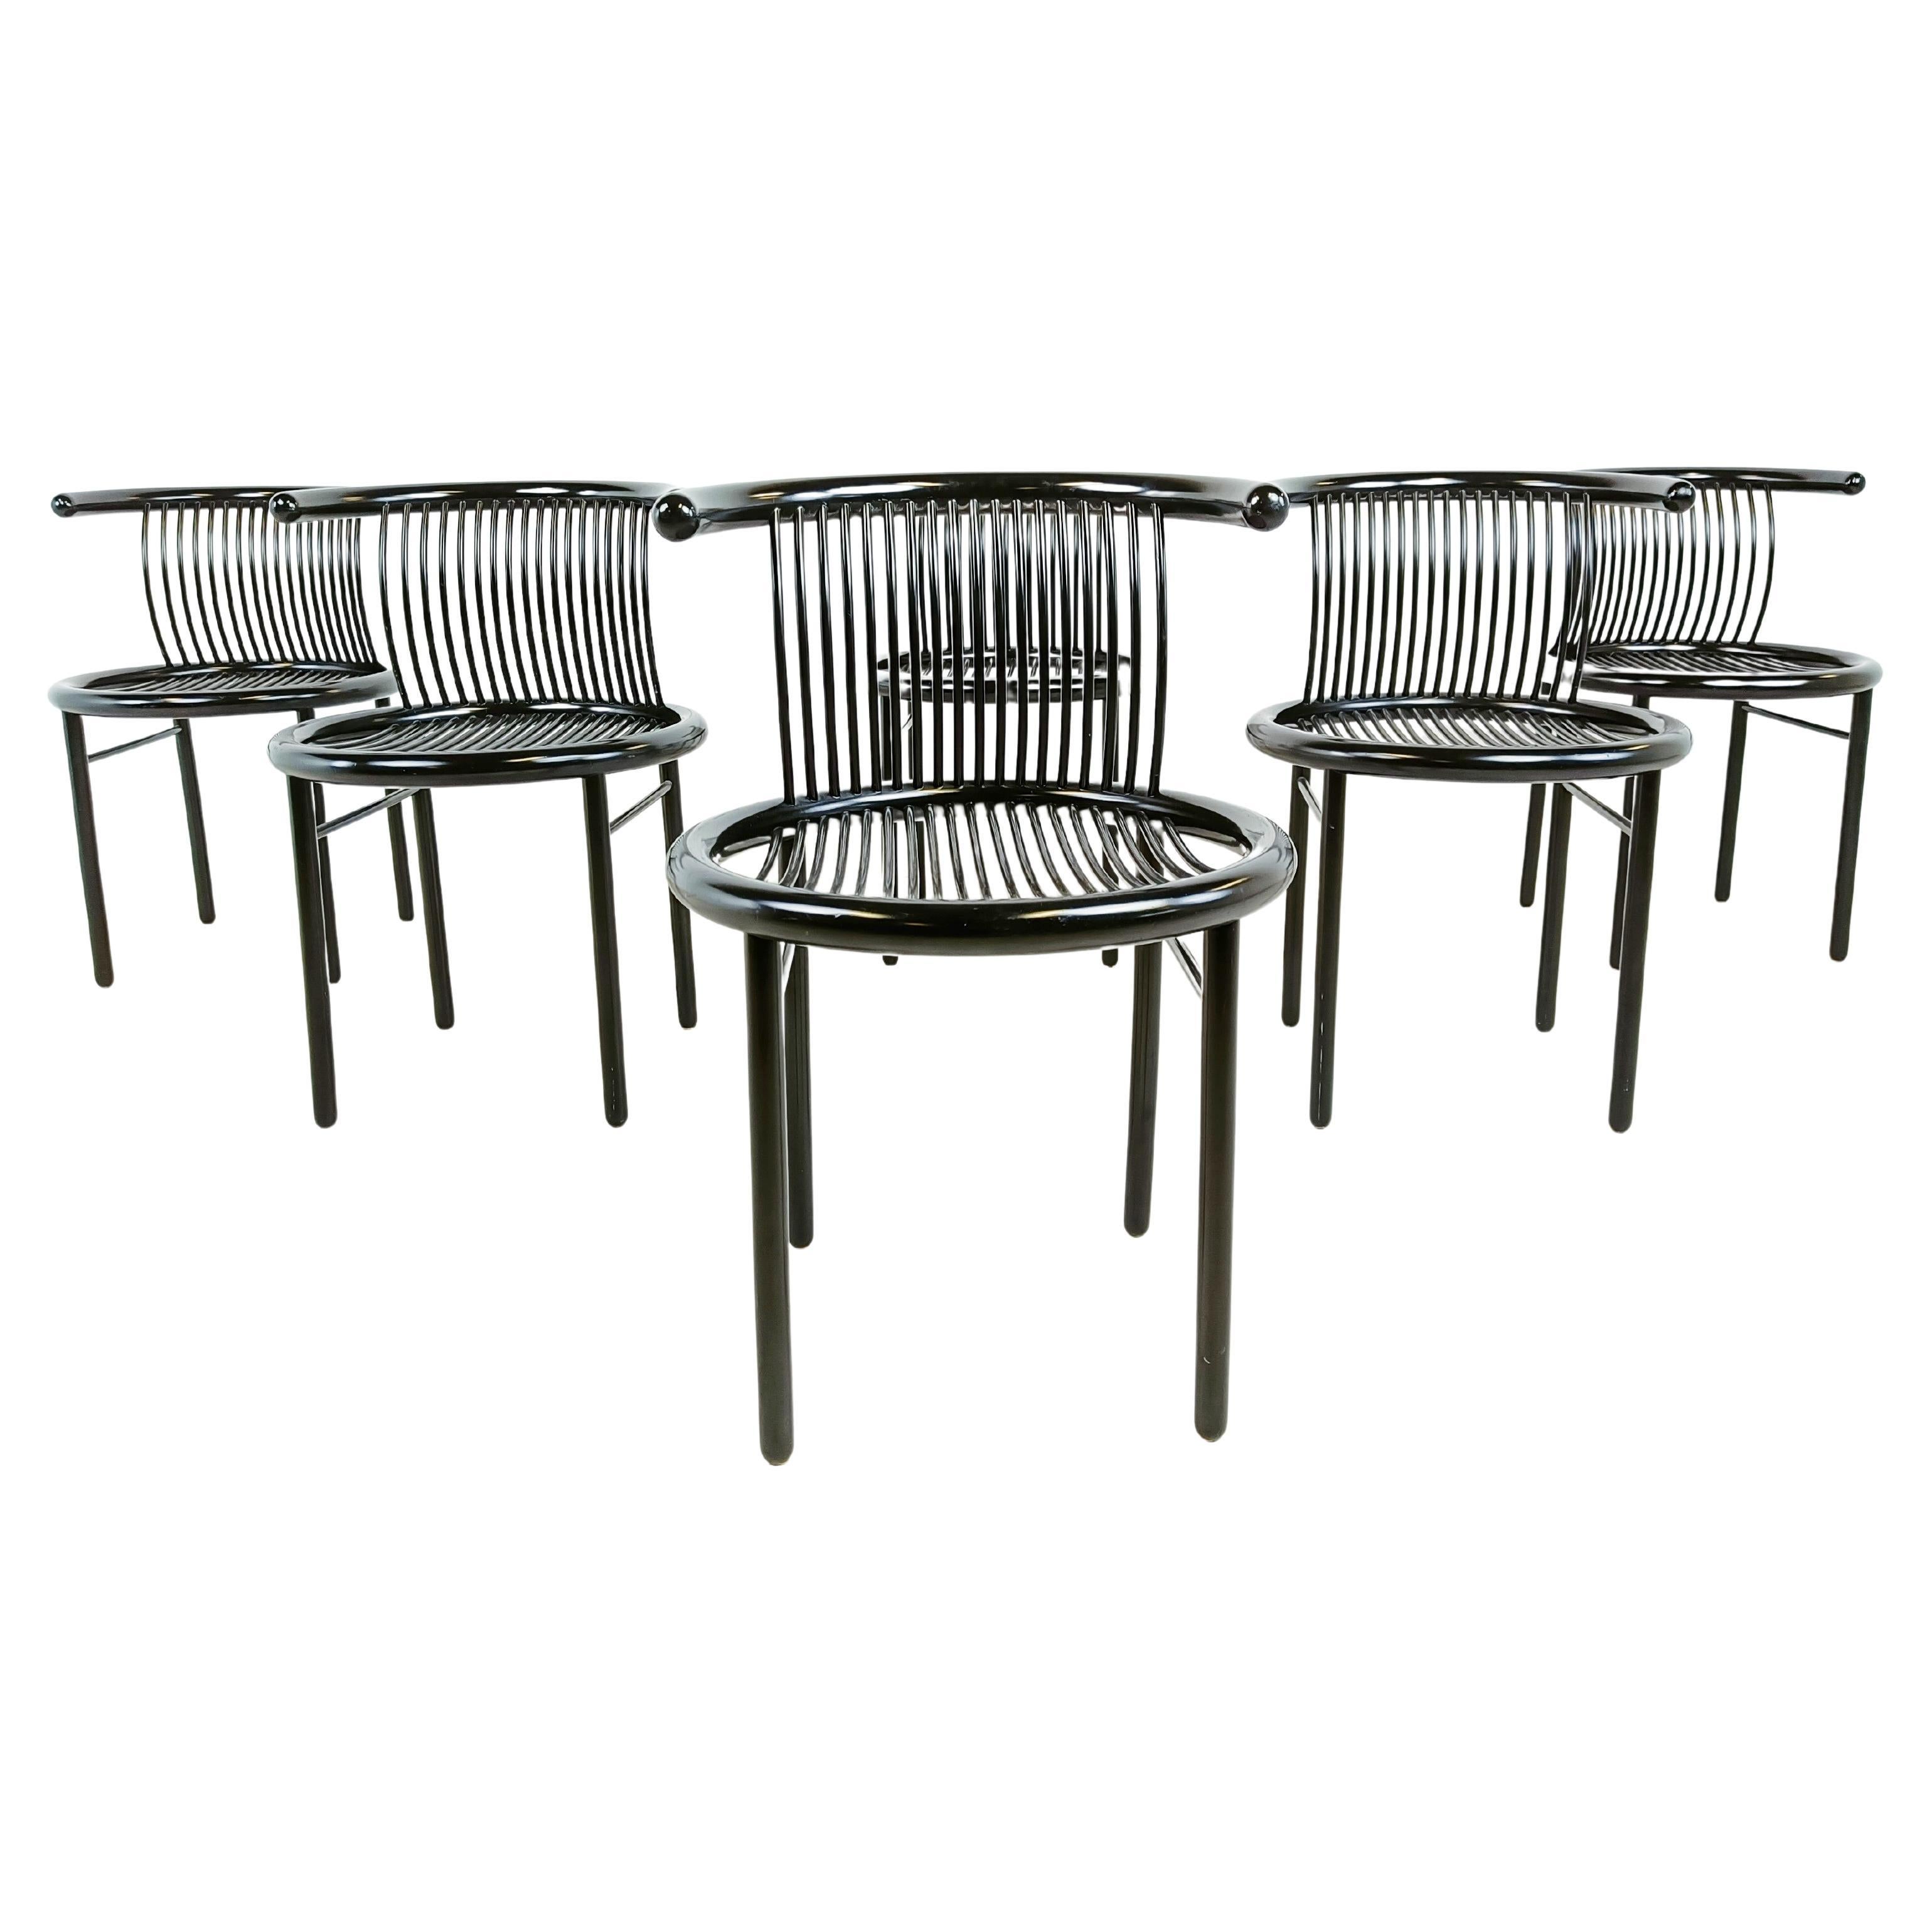 Set of 6 Vintage "CIRCO" Chairs by Jutta & Herbert Ohl for Lübke 1980s For Sale